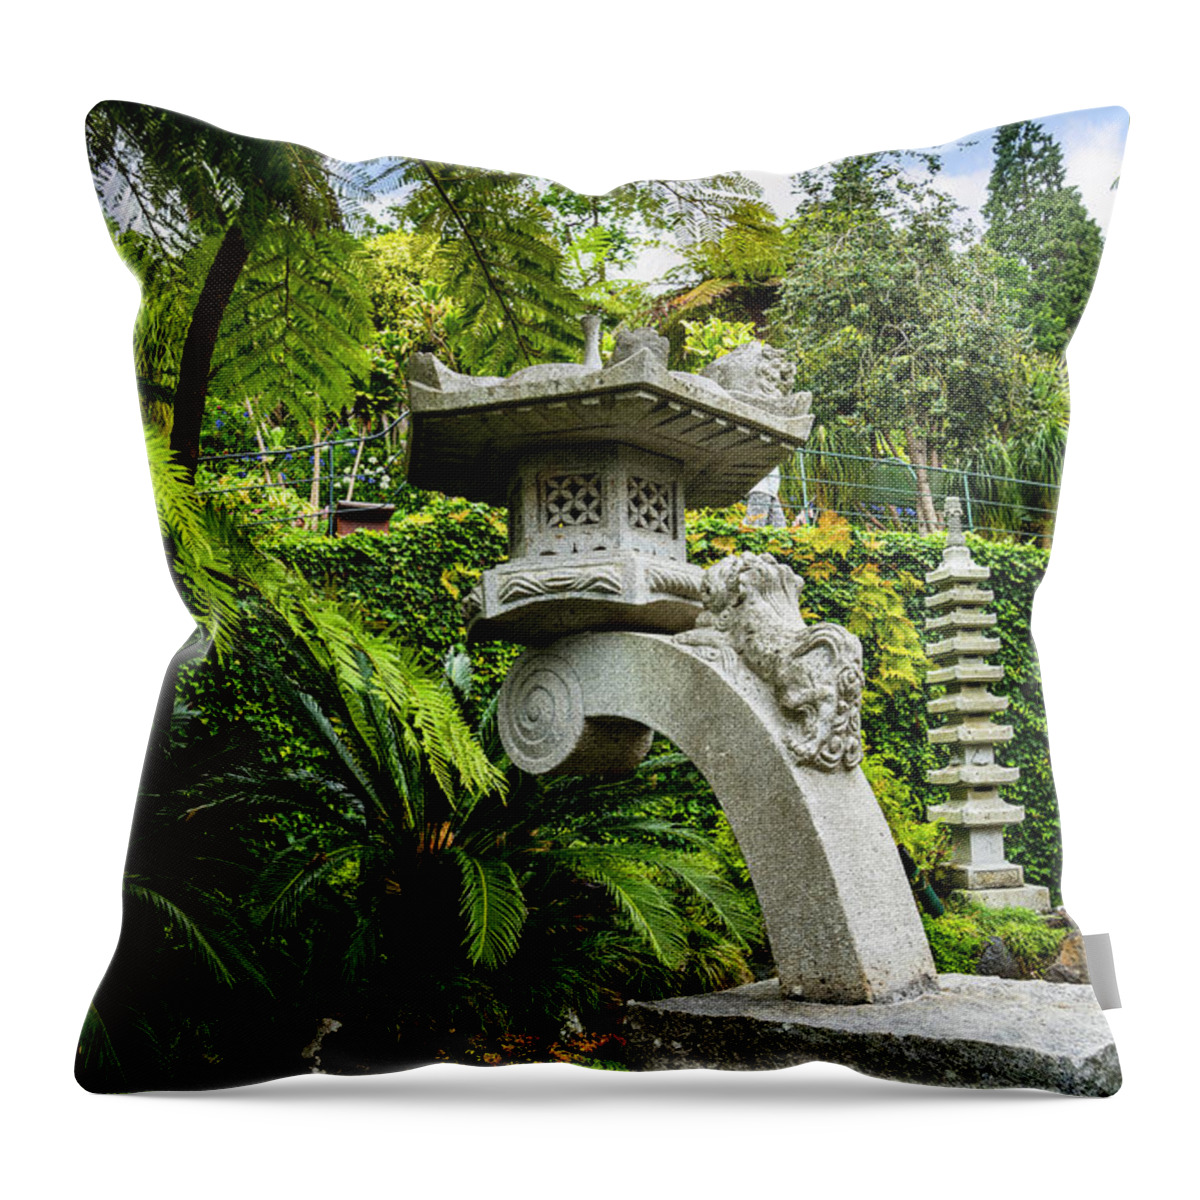 Tropical Throw Pillow featuring the photograph The Stone Lantern by Brenda Kean